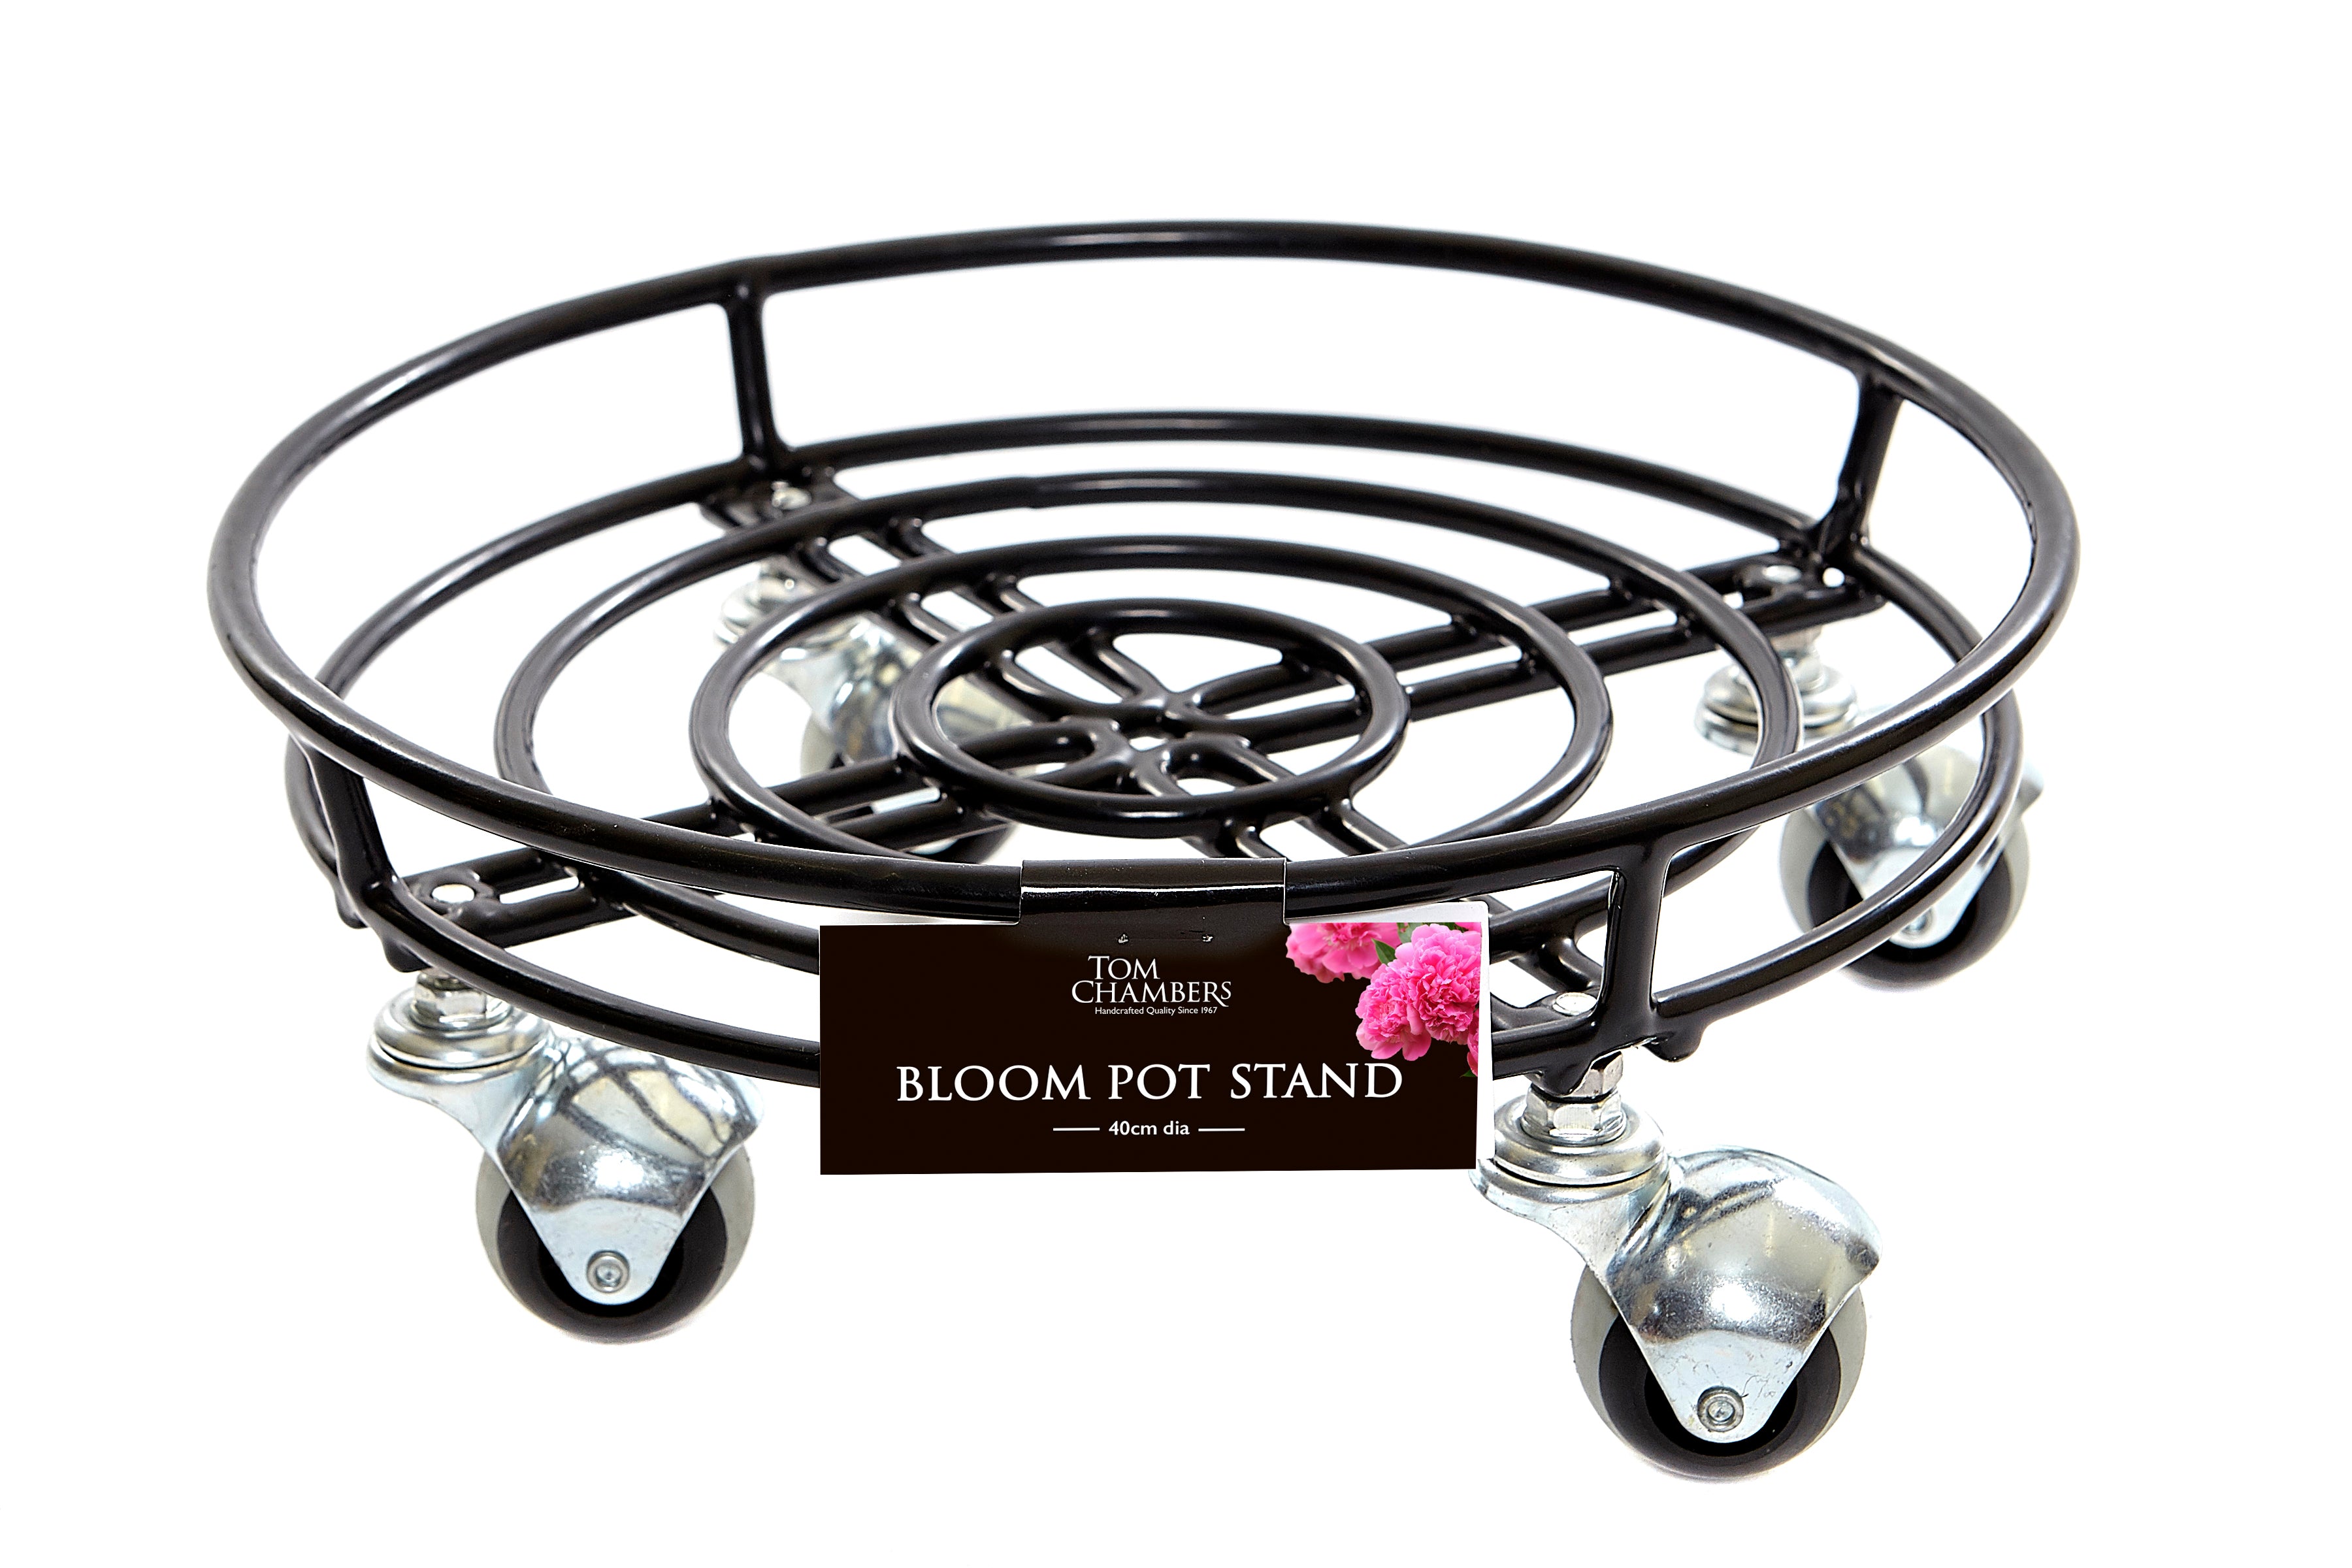 Tom Chambers Handcrafted Heavy Duty Round Black Metal Garden Patio Plant Flower Pot Stand Caddy Trolley Dolly on Strong Metal Castor Wheels 32cm